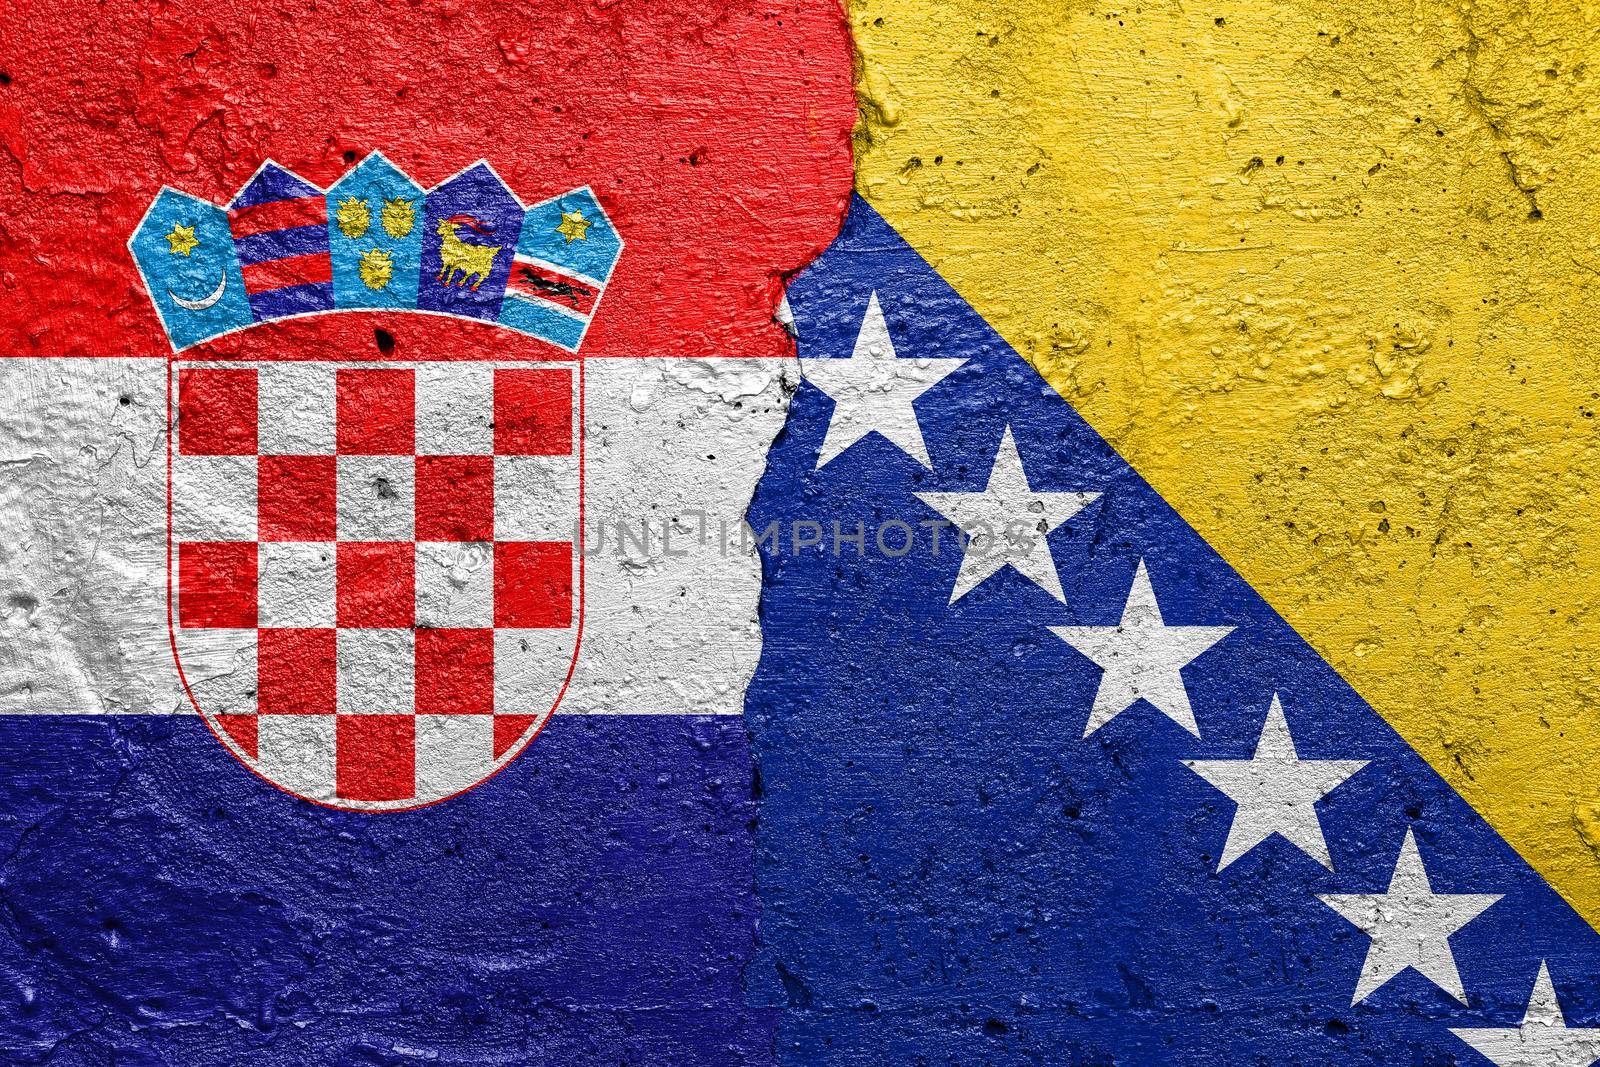 Croatia and Bosnia and Herzegovina - Cracked concrete wall painted with a Croatian flag on the left and a Bosnia flag on the right stock photo by adamr